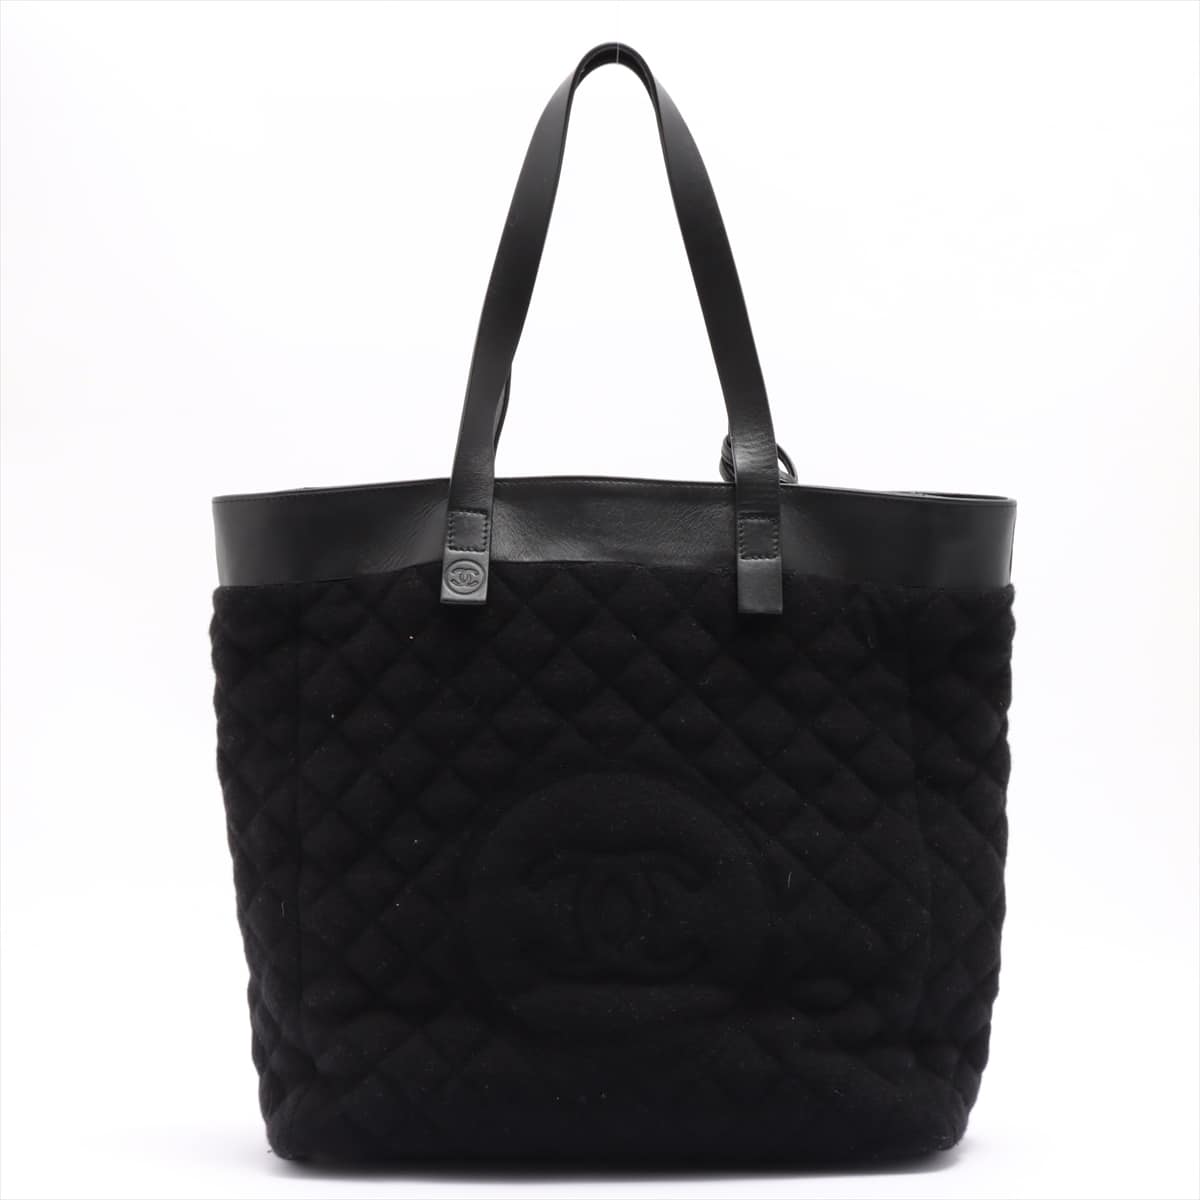 Chanel Matelasse Pile Tote bag Black 18XXXXXX with pouch